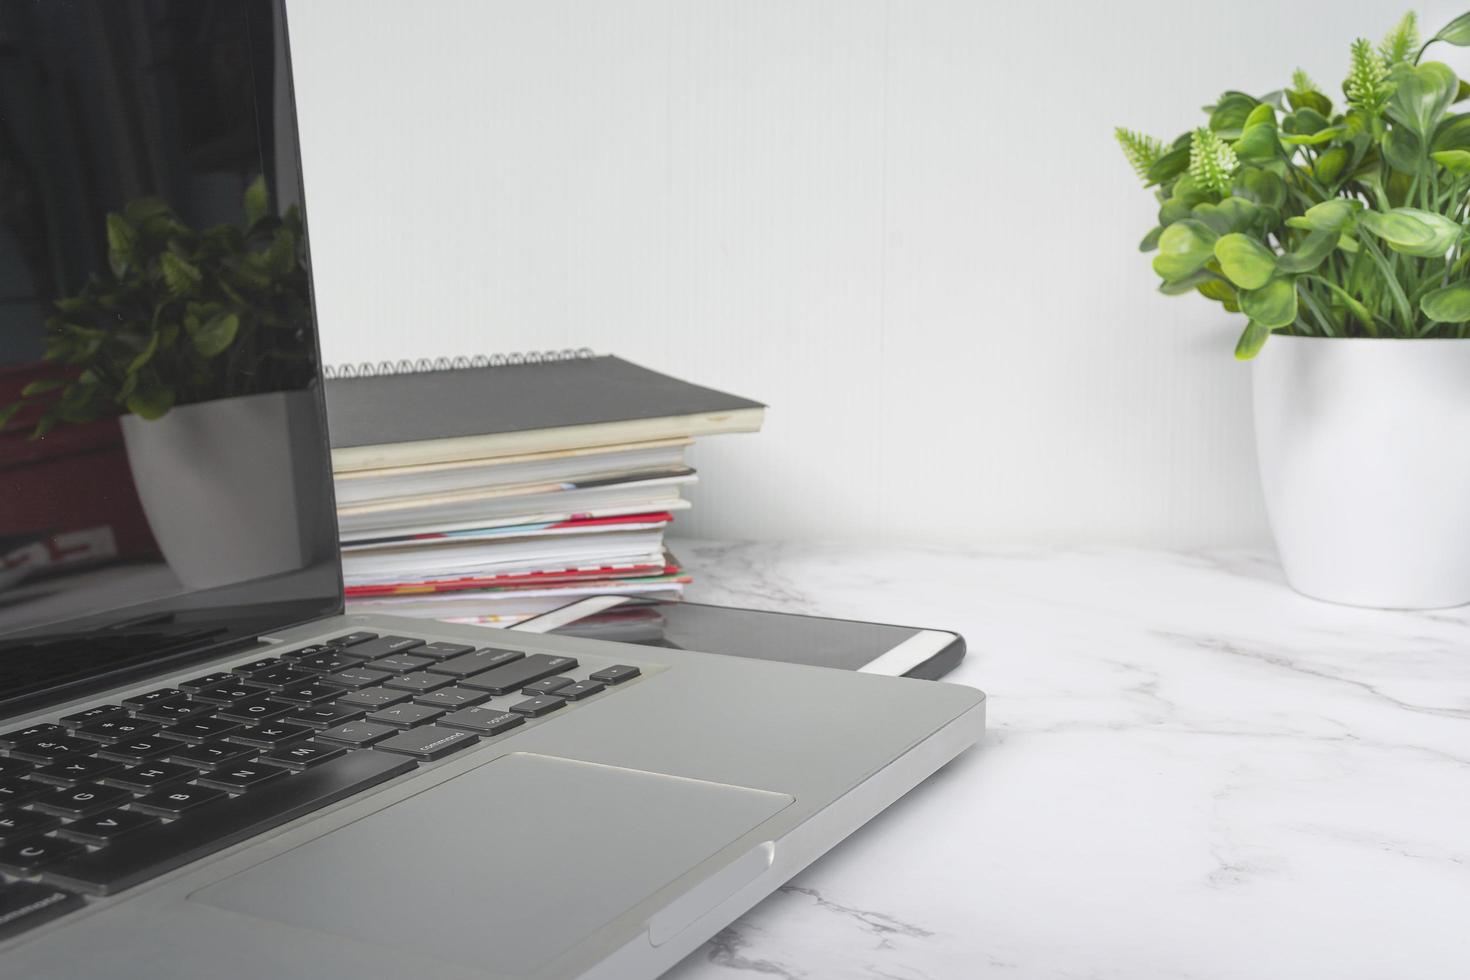 Laptop on white table with potted plant, notebooks and smartphone. photo